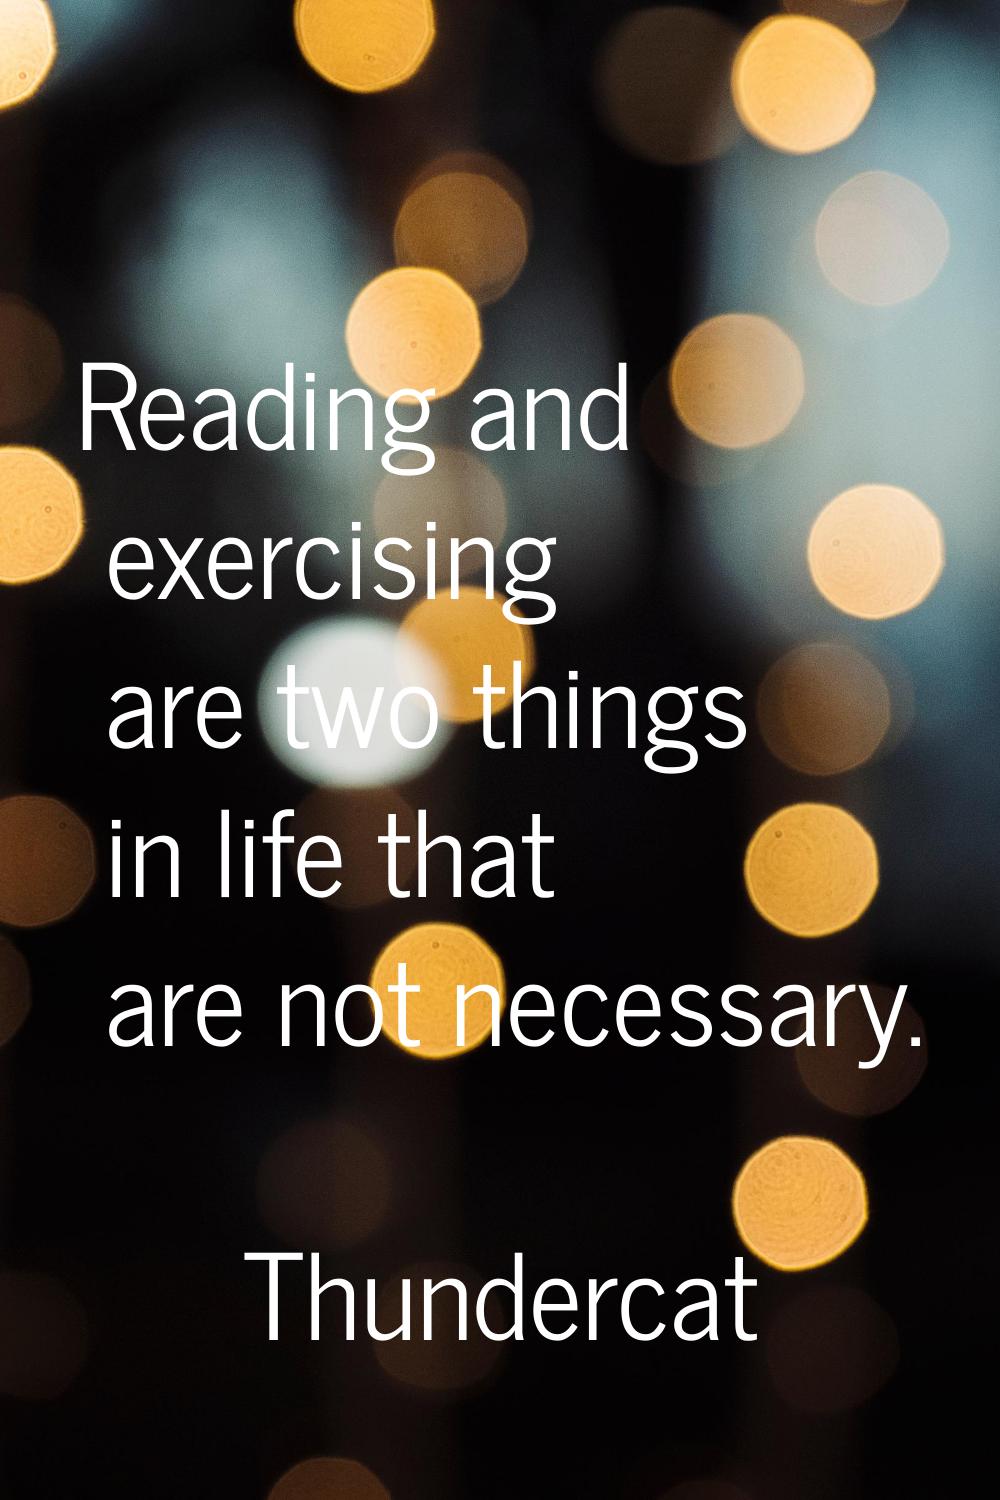 Reading and exercising are two things in life that are not necessary.